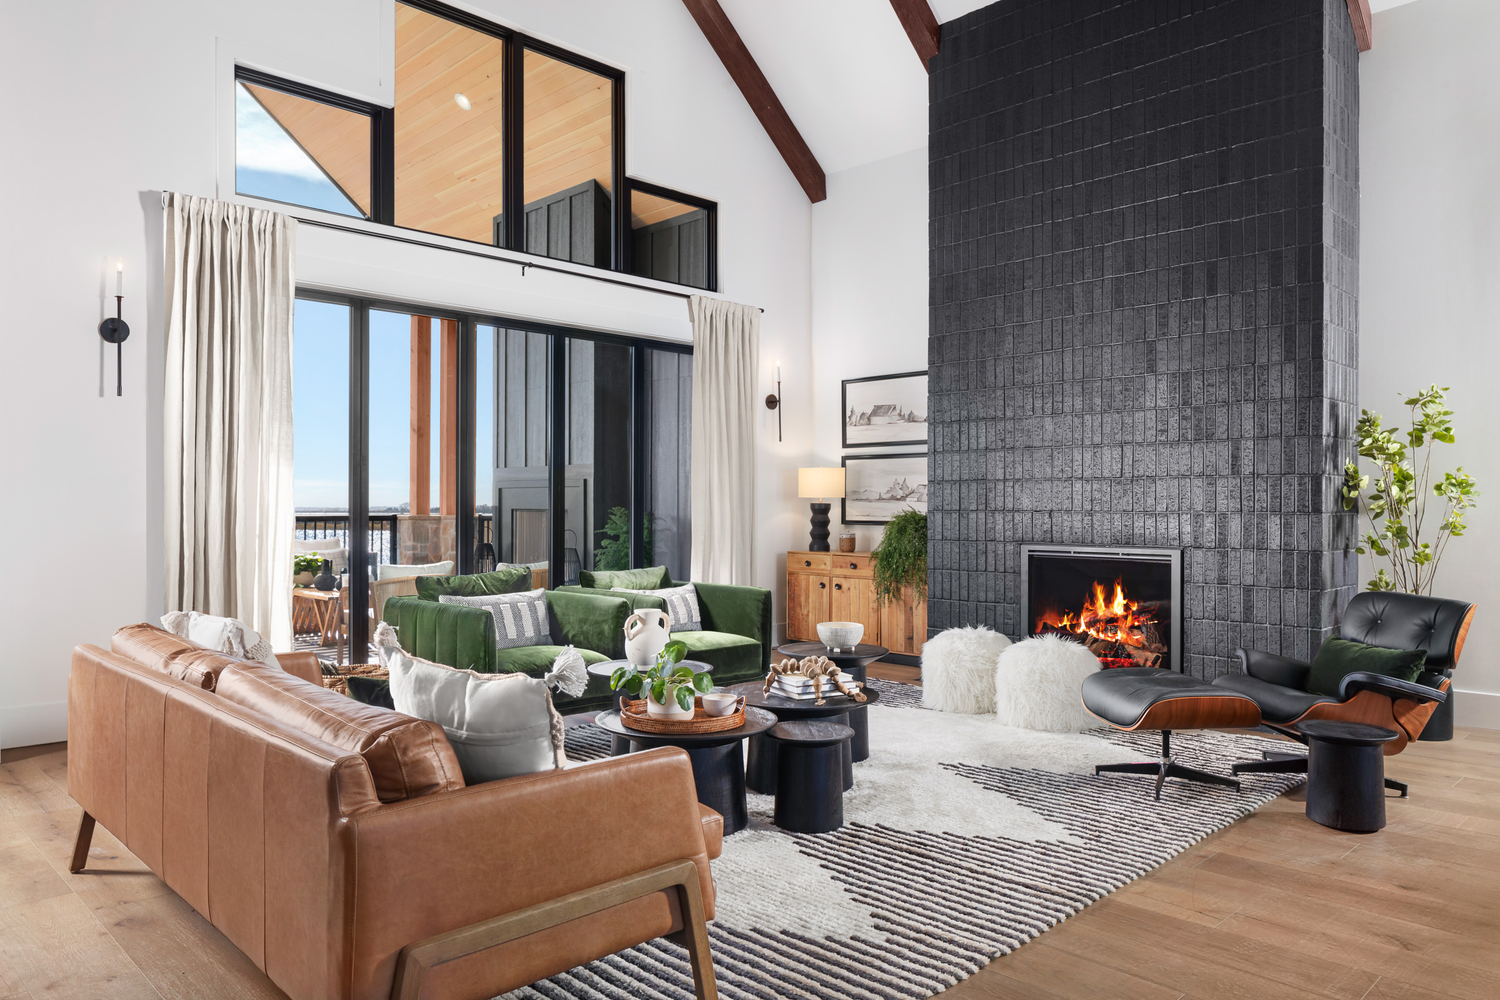 Living room of a home with a tall black tile fireplace as its centerpiece